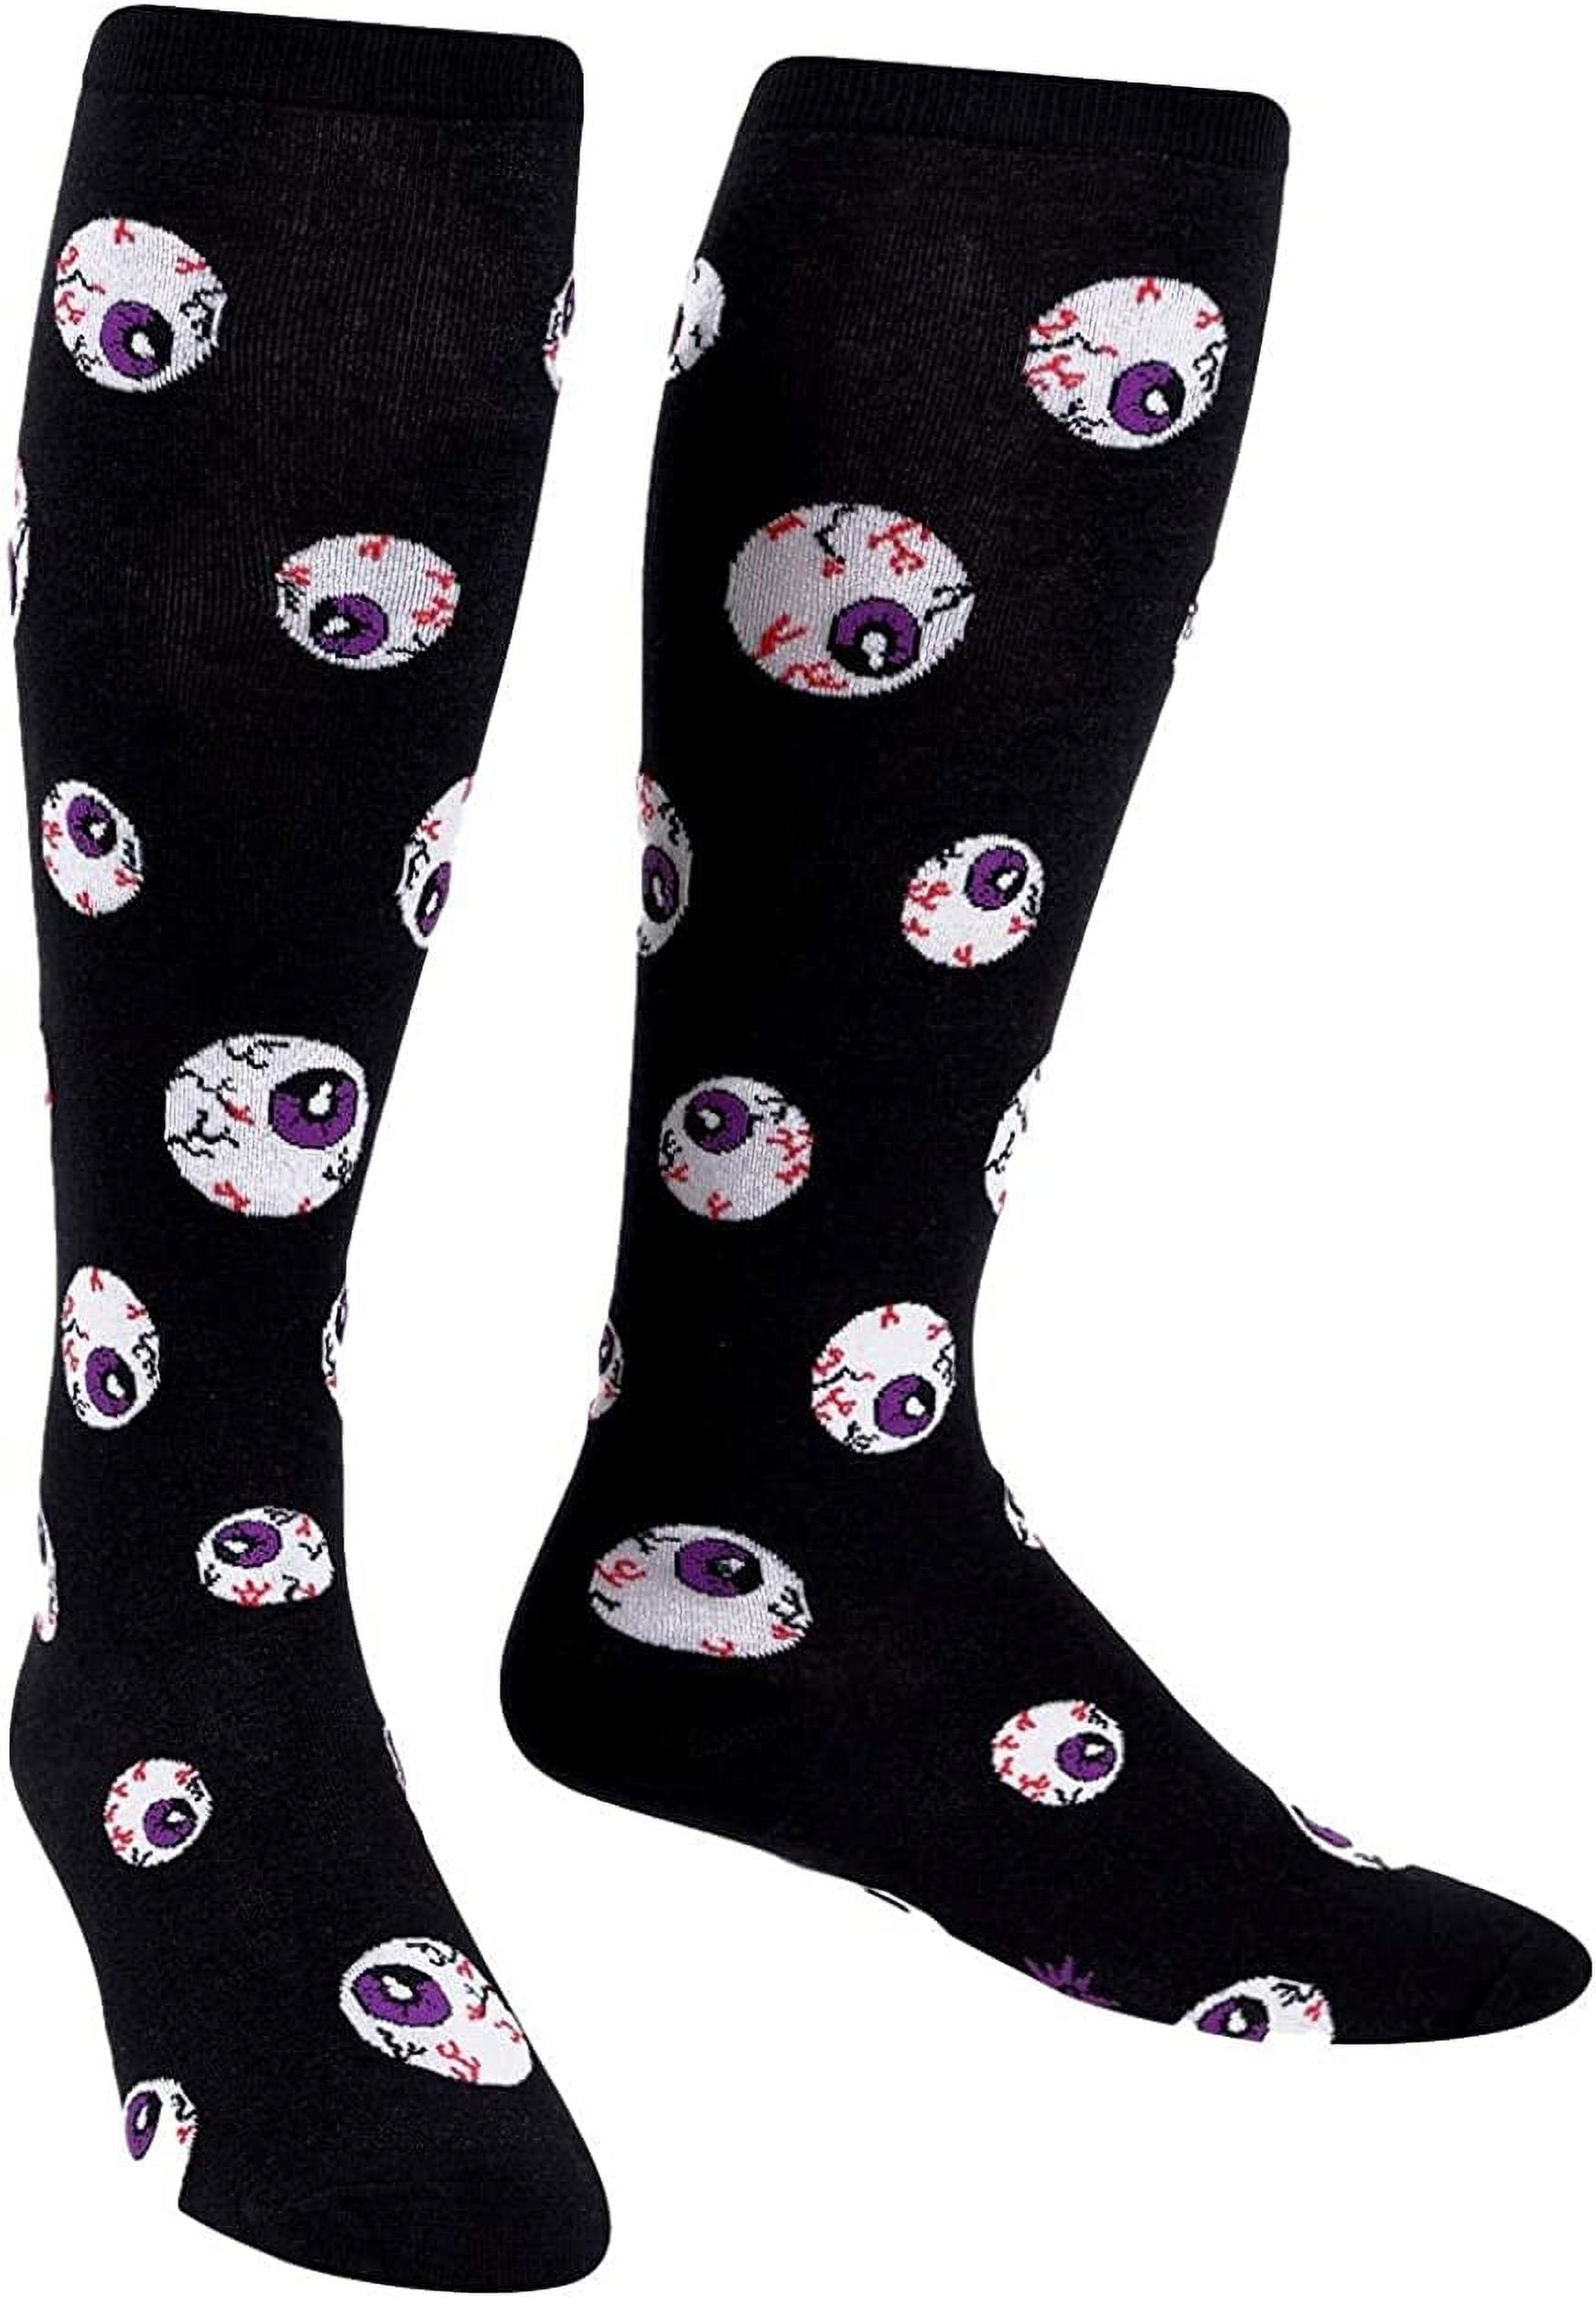 SOCK it to me Unisex Stretch-It Knee High Socks (S0113),All Eyes On Me ...